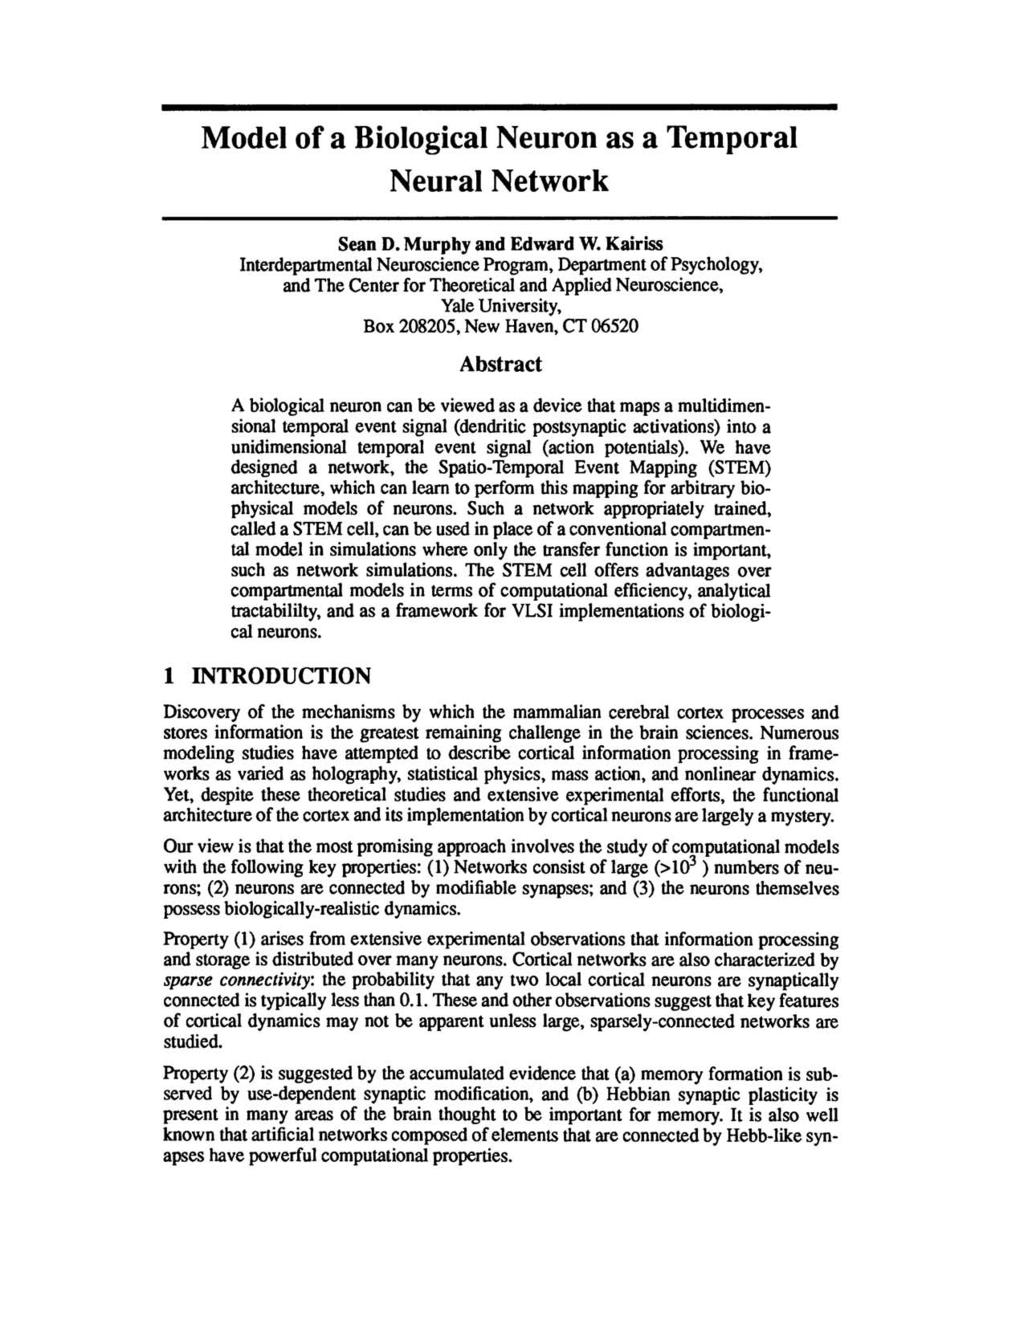 Model of a Biological Neuron as a Temporal Neural Network Sean D. Murphy and Edward W.